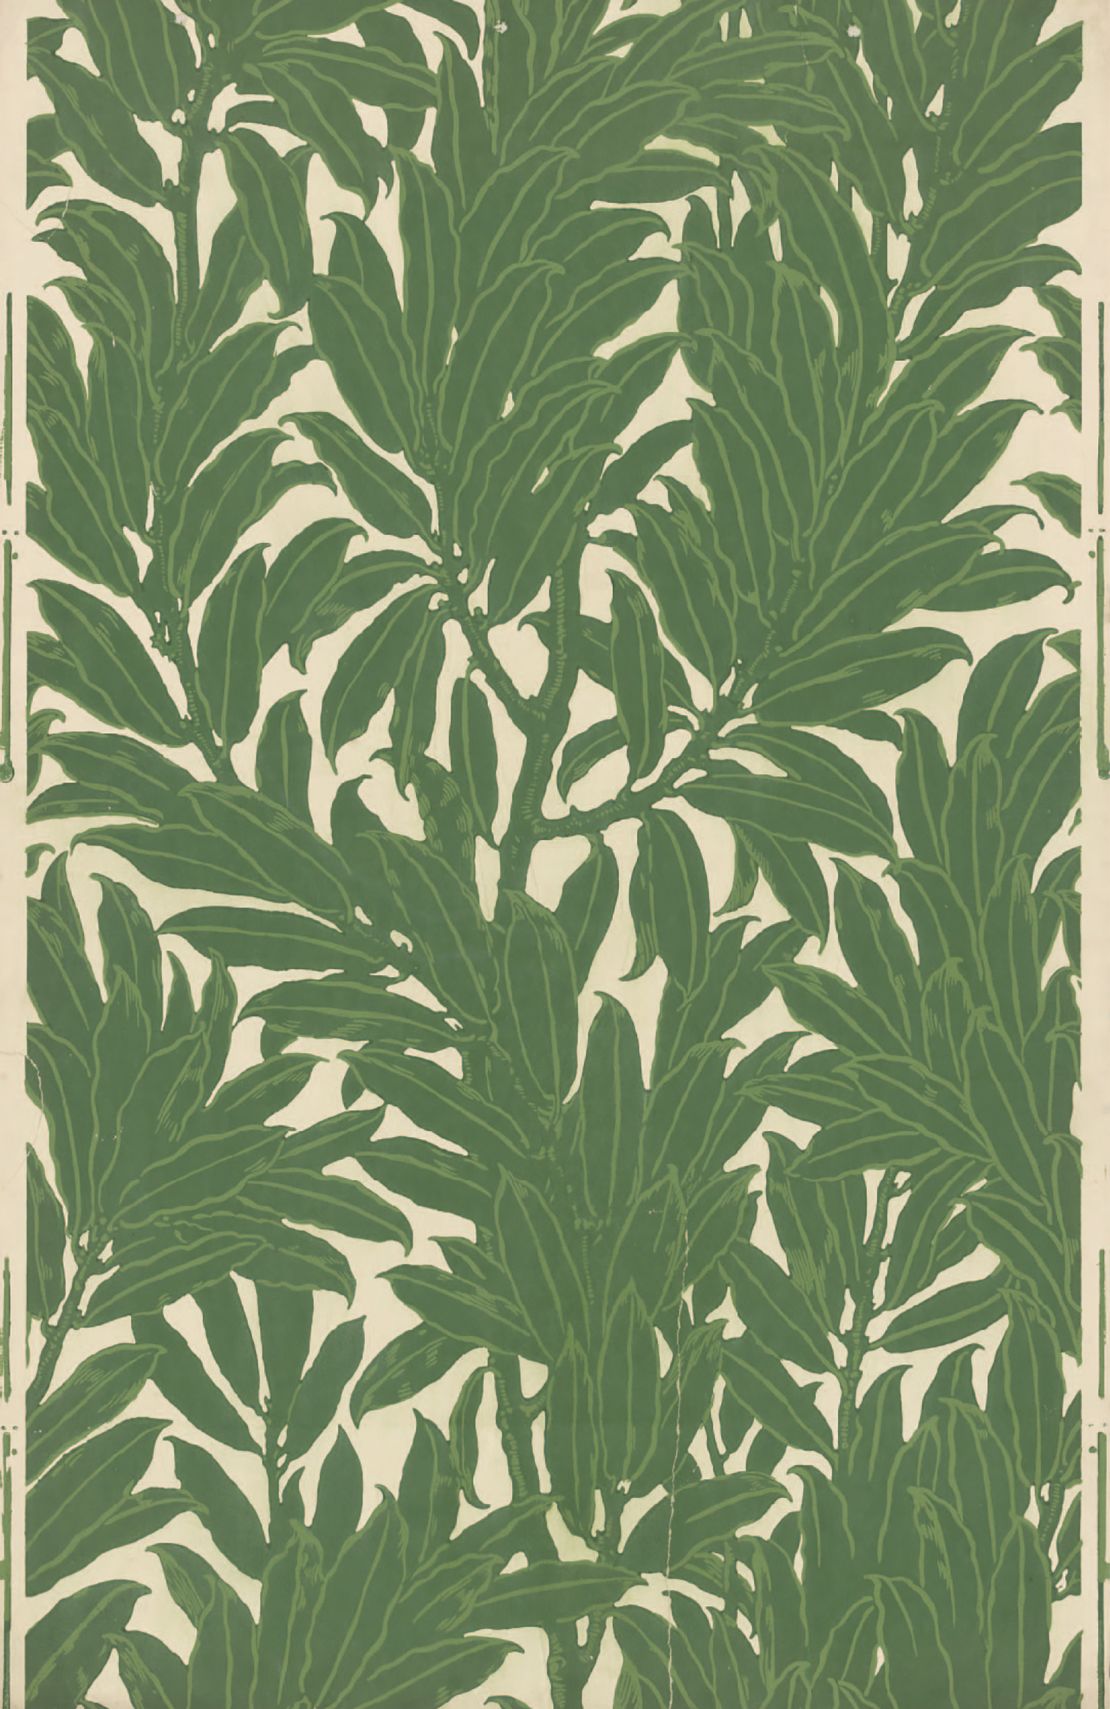 A portion of "Laurel" wallpaper designed by Walter Crane using woodblock print on paper in England, 1911.